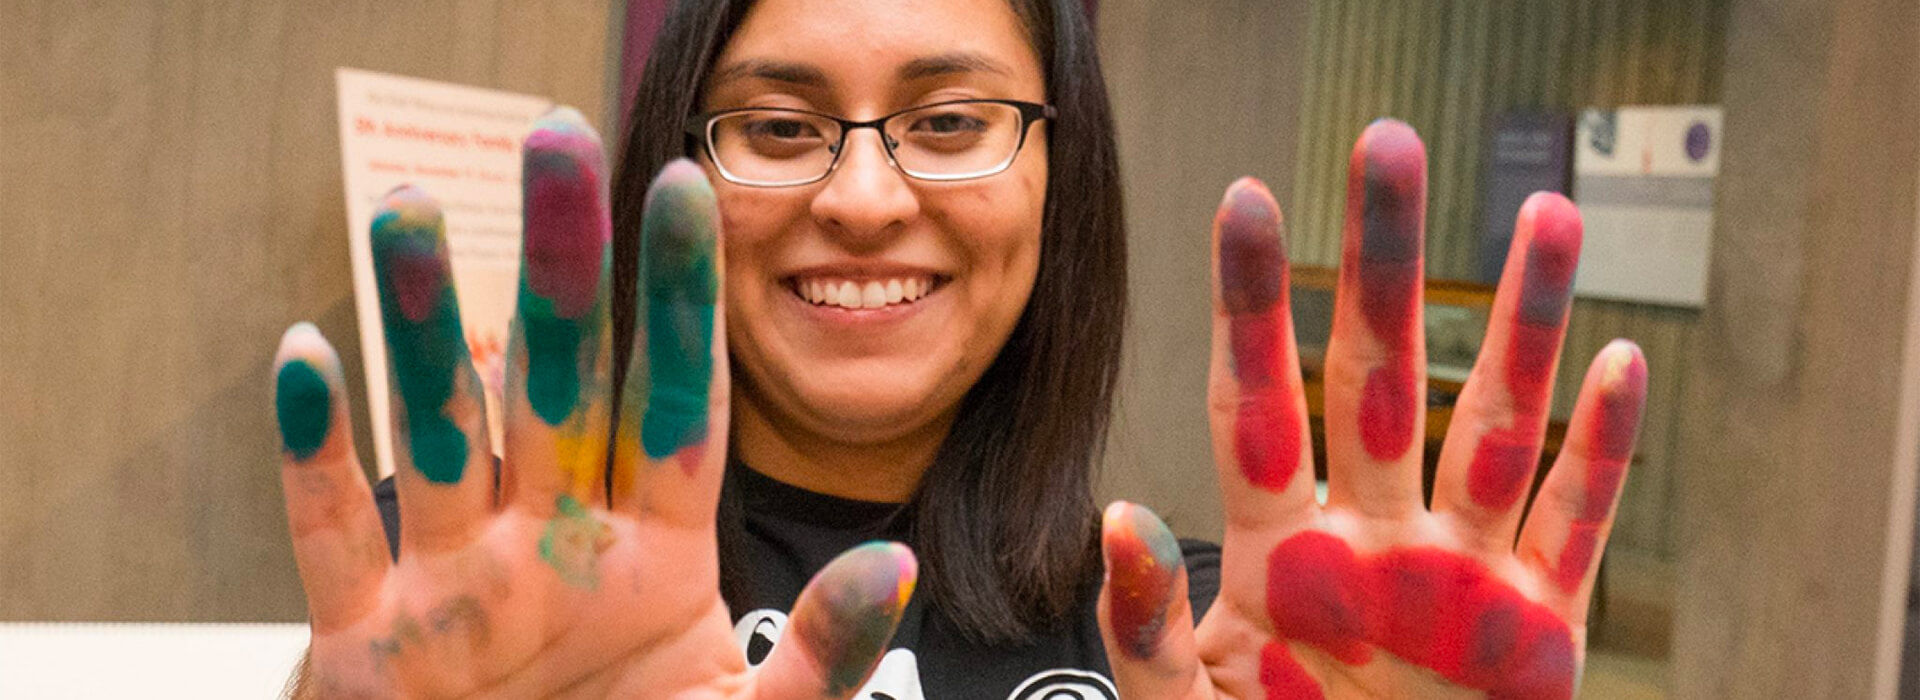 A woman holds up her hands with paint on them